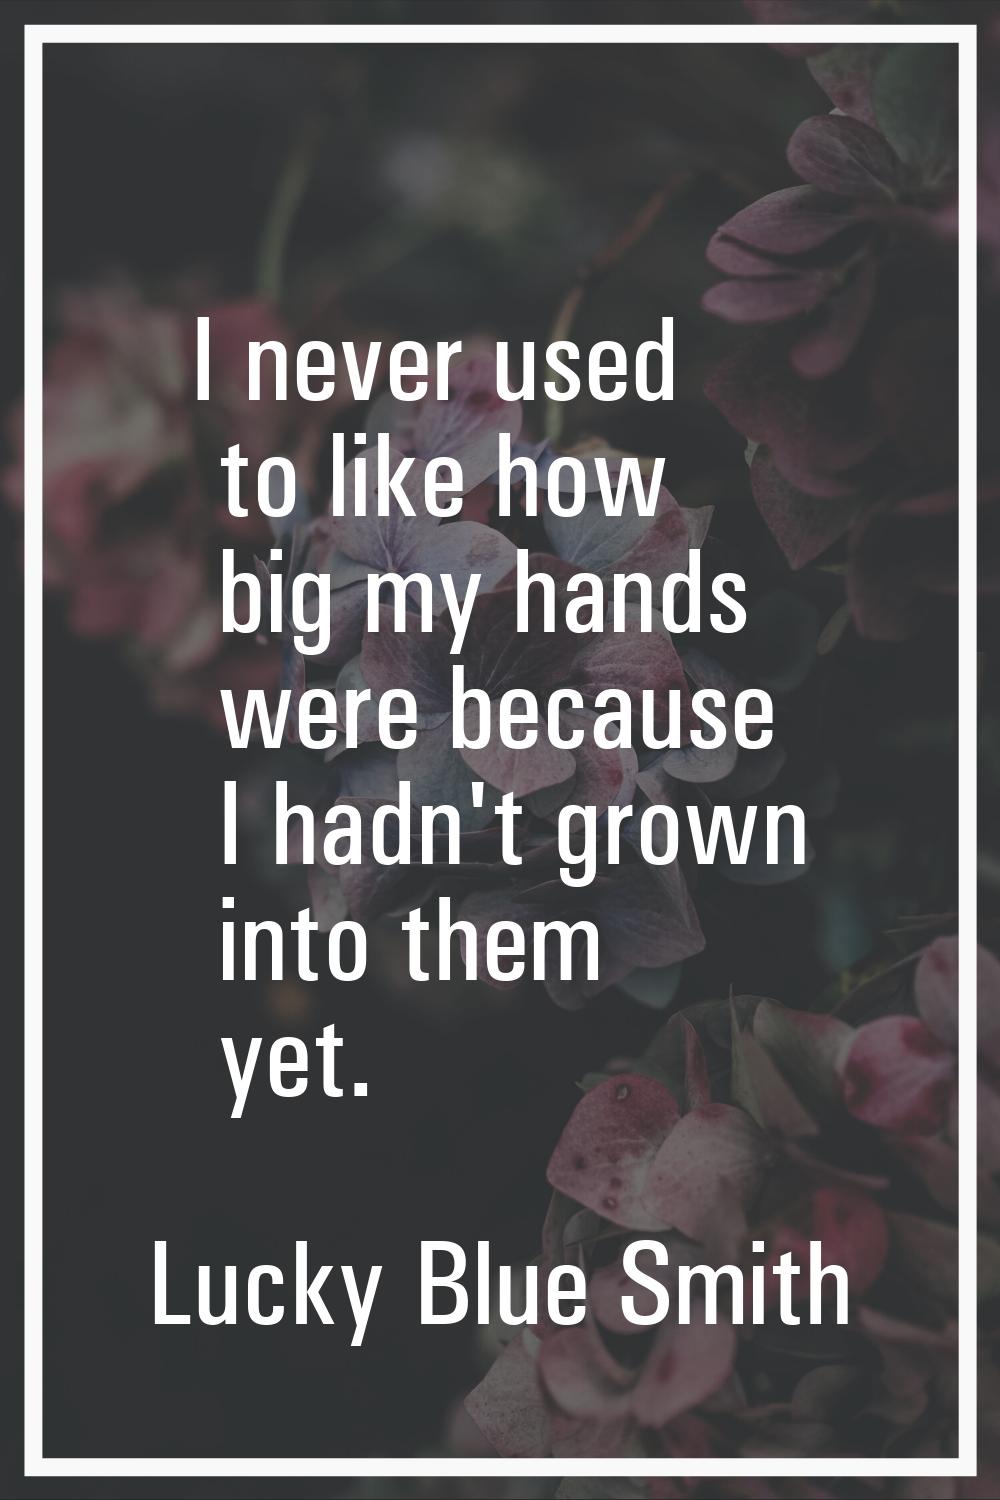 I never used to like how big my hands were because I hadn't grown into them yet.